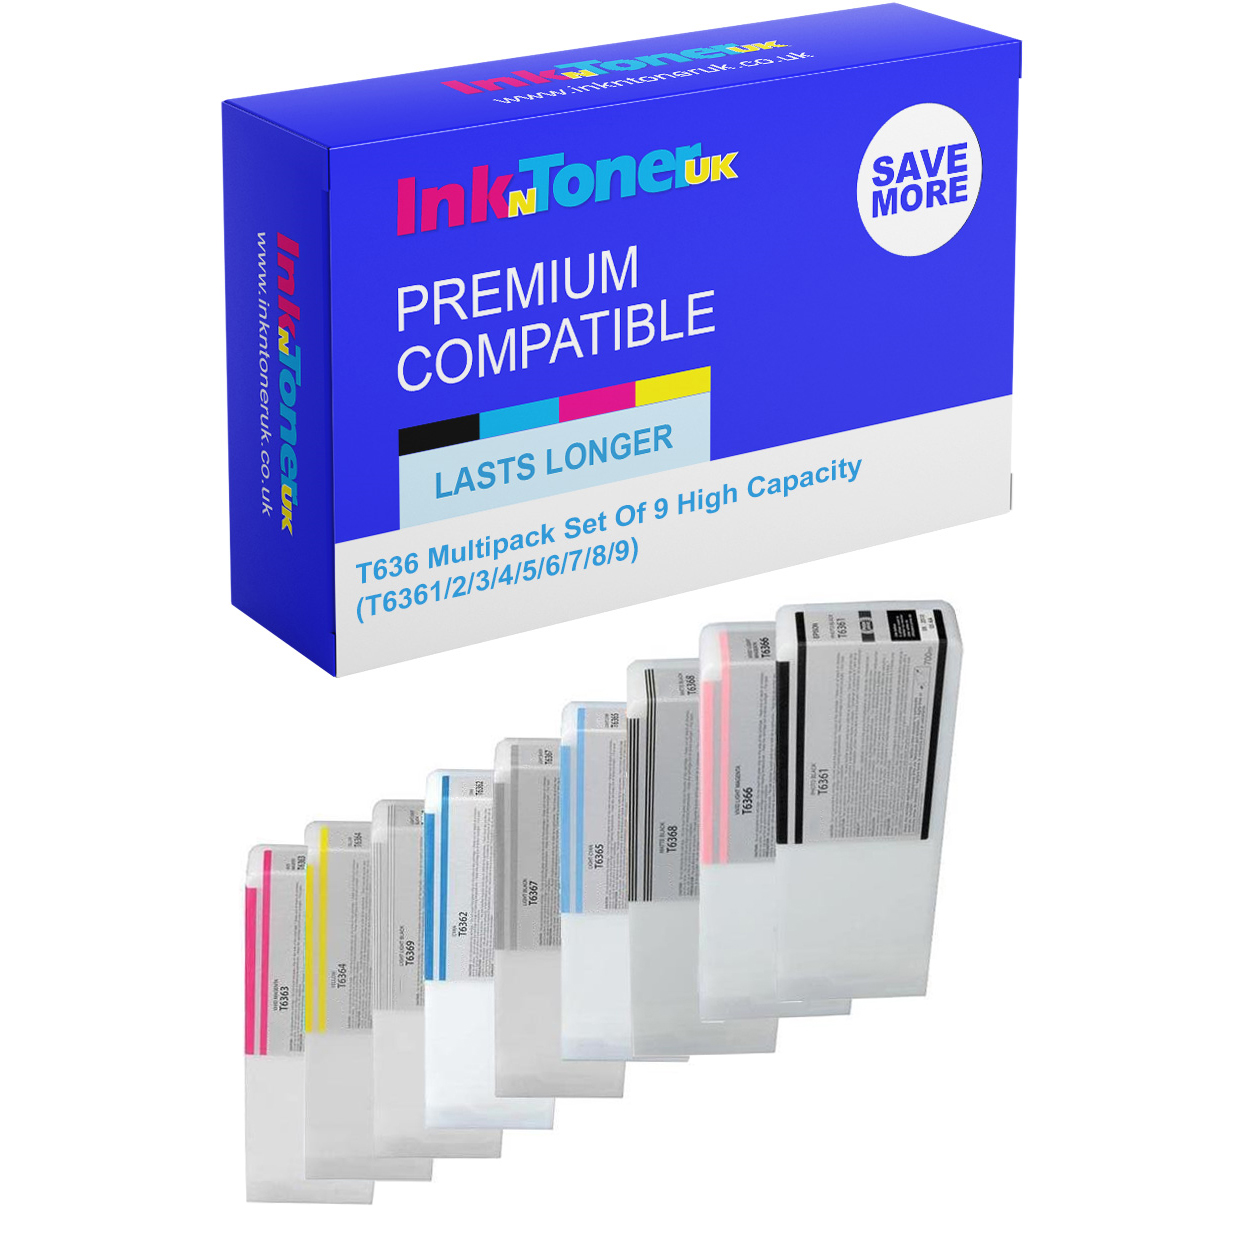 Premium Compatible Epson T636 Multipack Set Of 9 High Capacity Ink Cartridges (T6361/2/3/4/5/6/7/8/9)